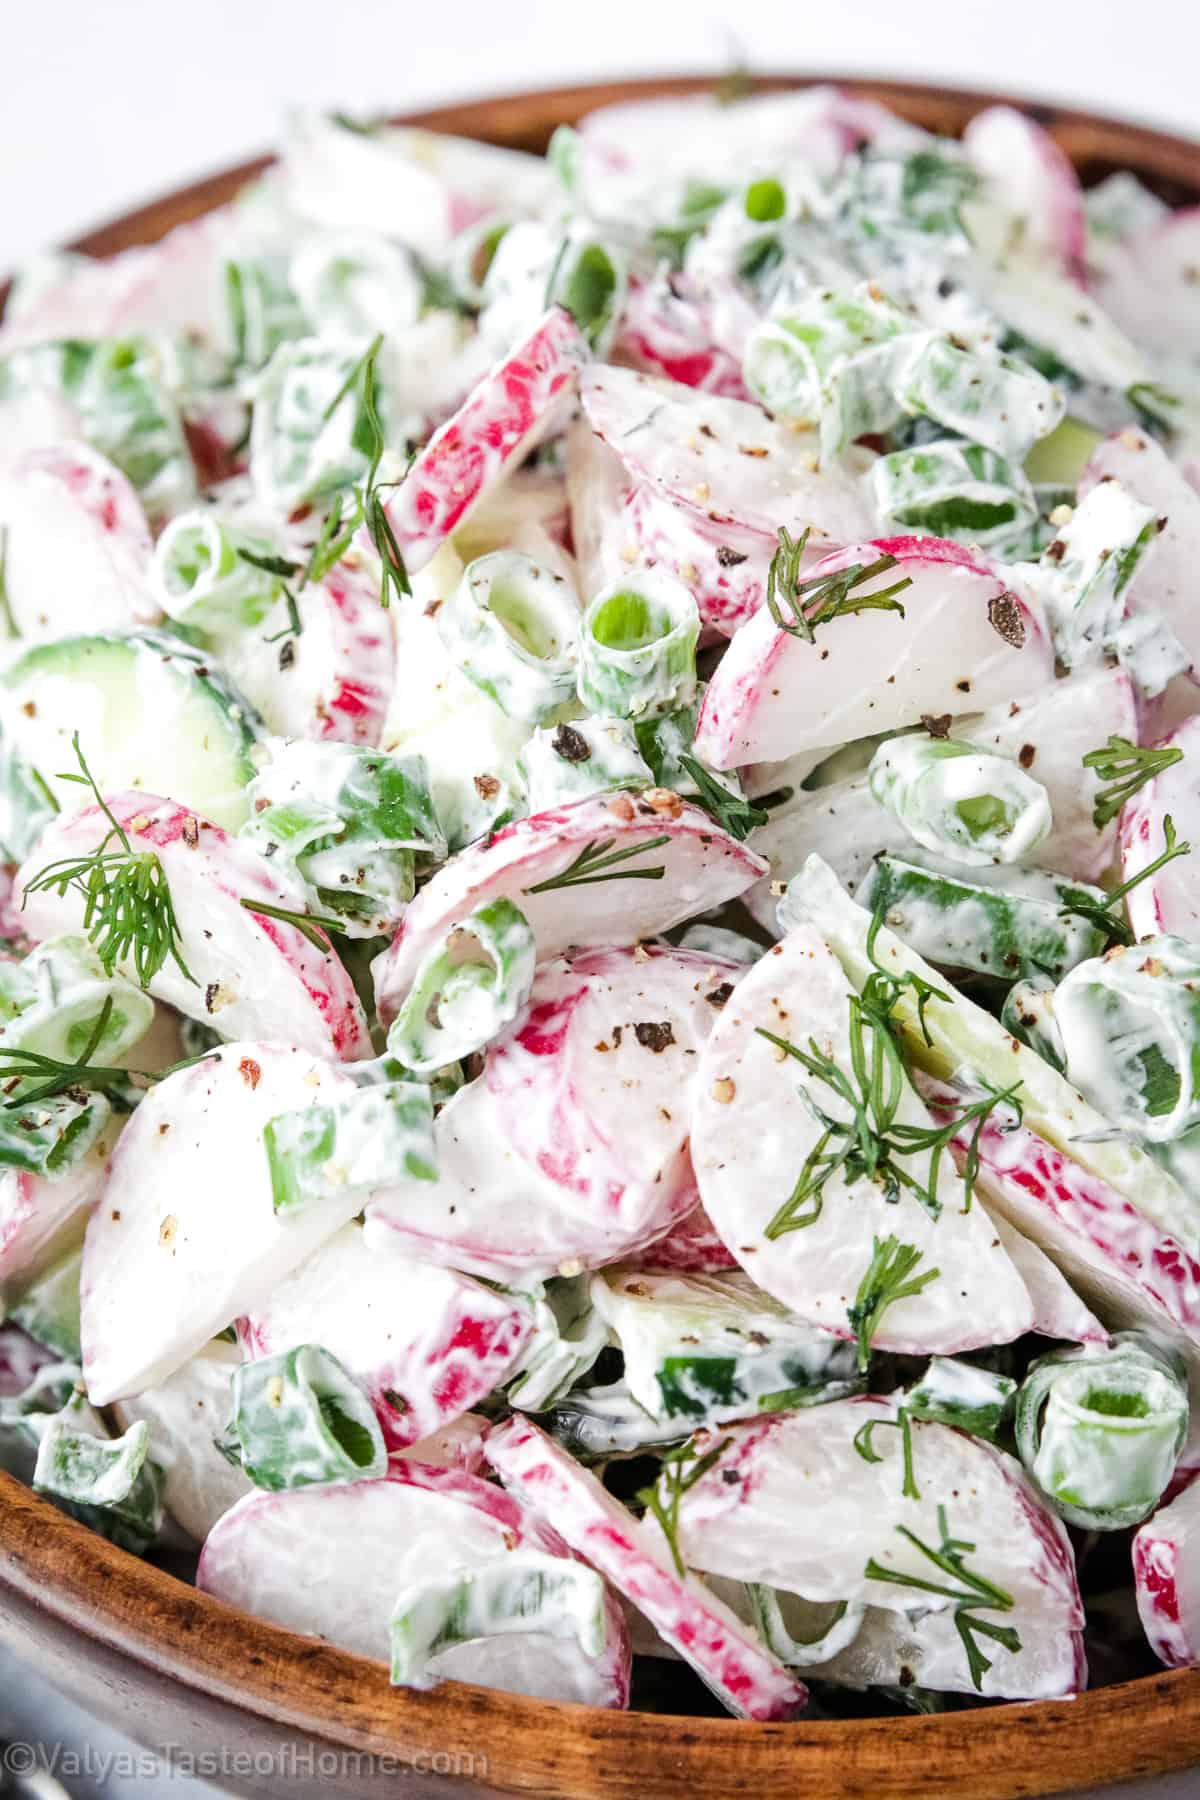 Radish salad is a refreshing and healthy dish that is perfect for any occasion, whether you're looking for a light lunch, a side dish to accompany your favorite main course, or a healthy snack.